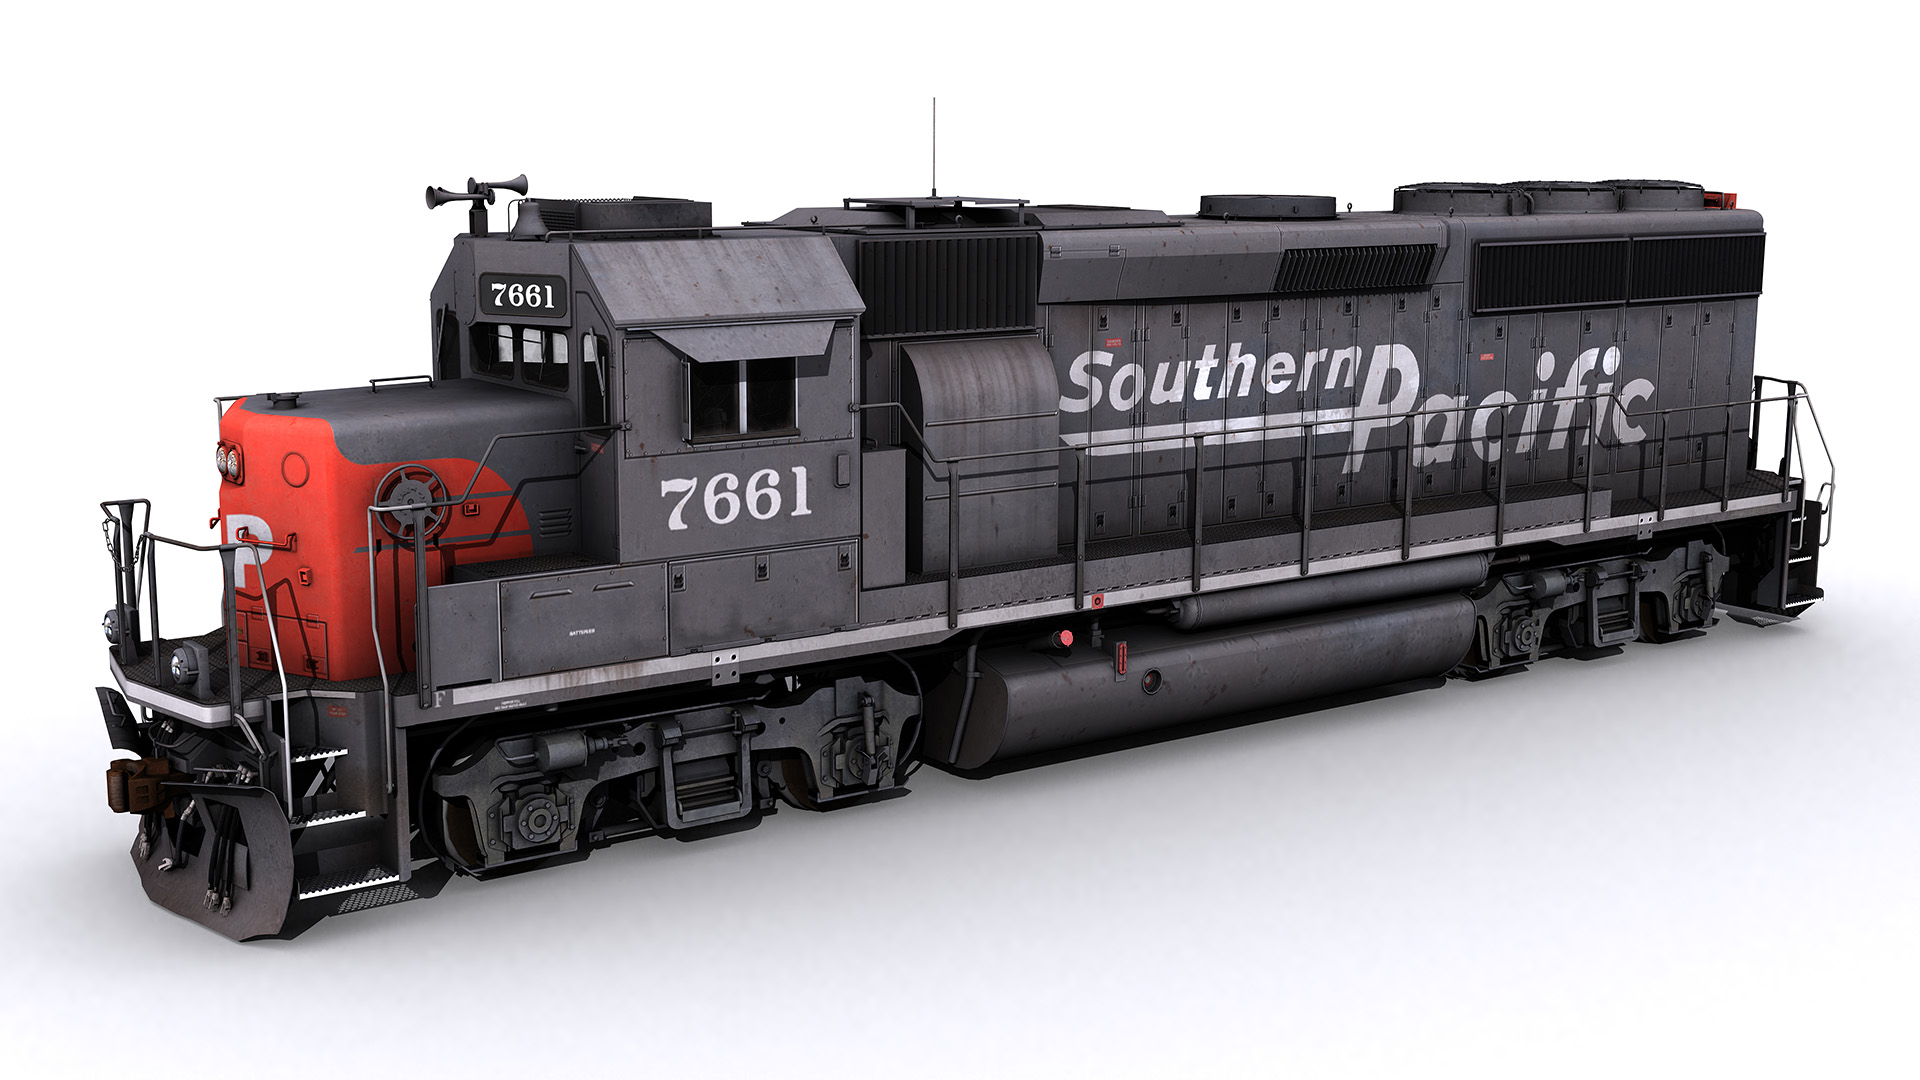 A southern Pacific rail engine